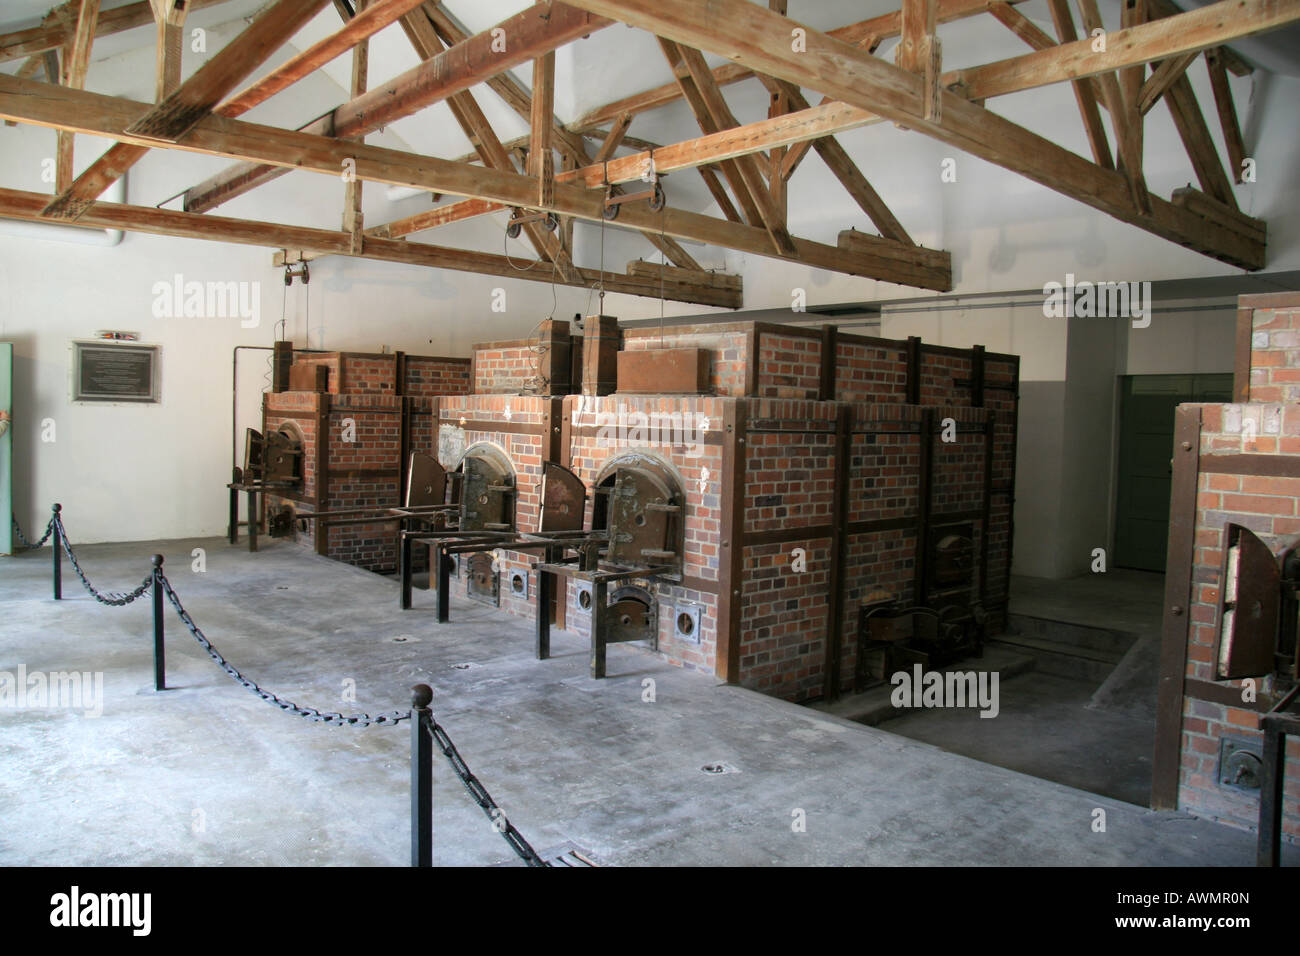 The ovens in the second Crematoria building, Barrack X, in the former German concentration camp at Dachau, Munich, Germany. Stock Photo